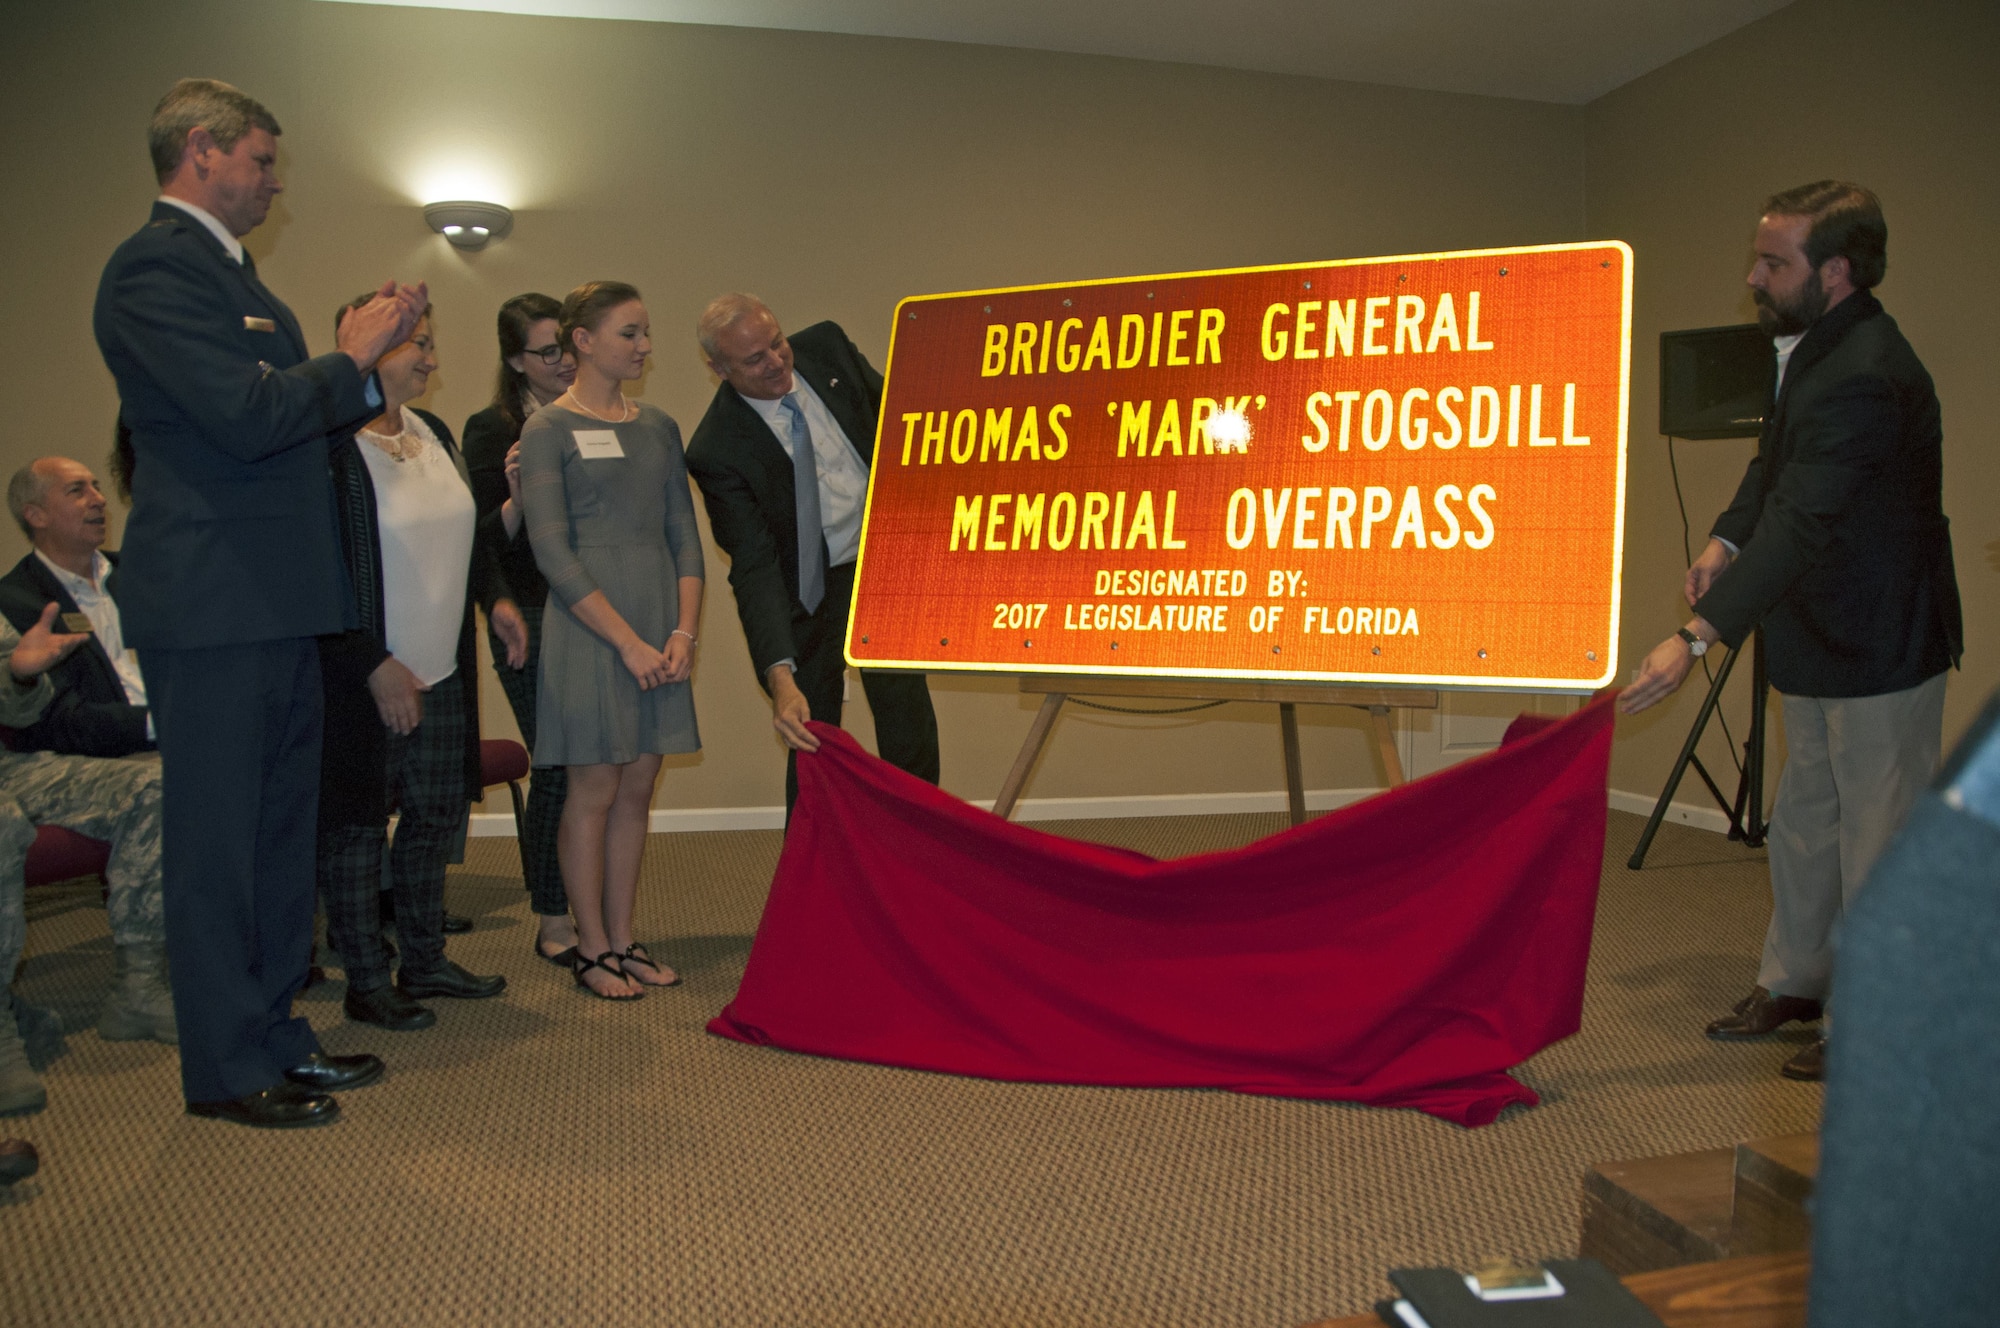 Family members of the late Brig. Gen. Thomas “Mark” Stogsdill witness state officials unveiling a sign dedicating to his memory.